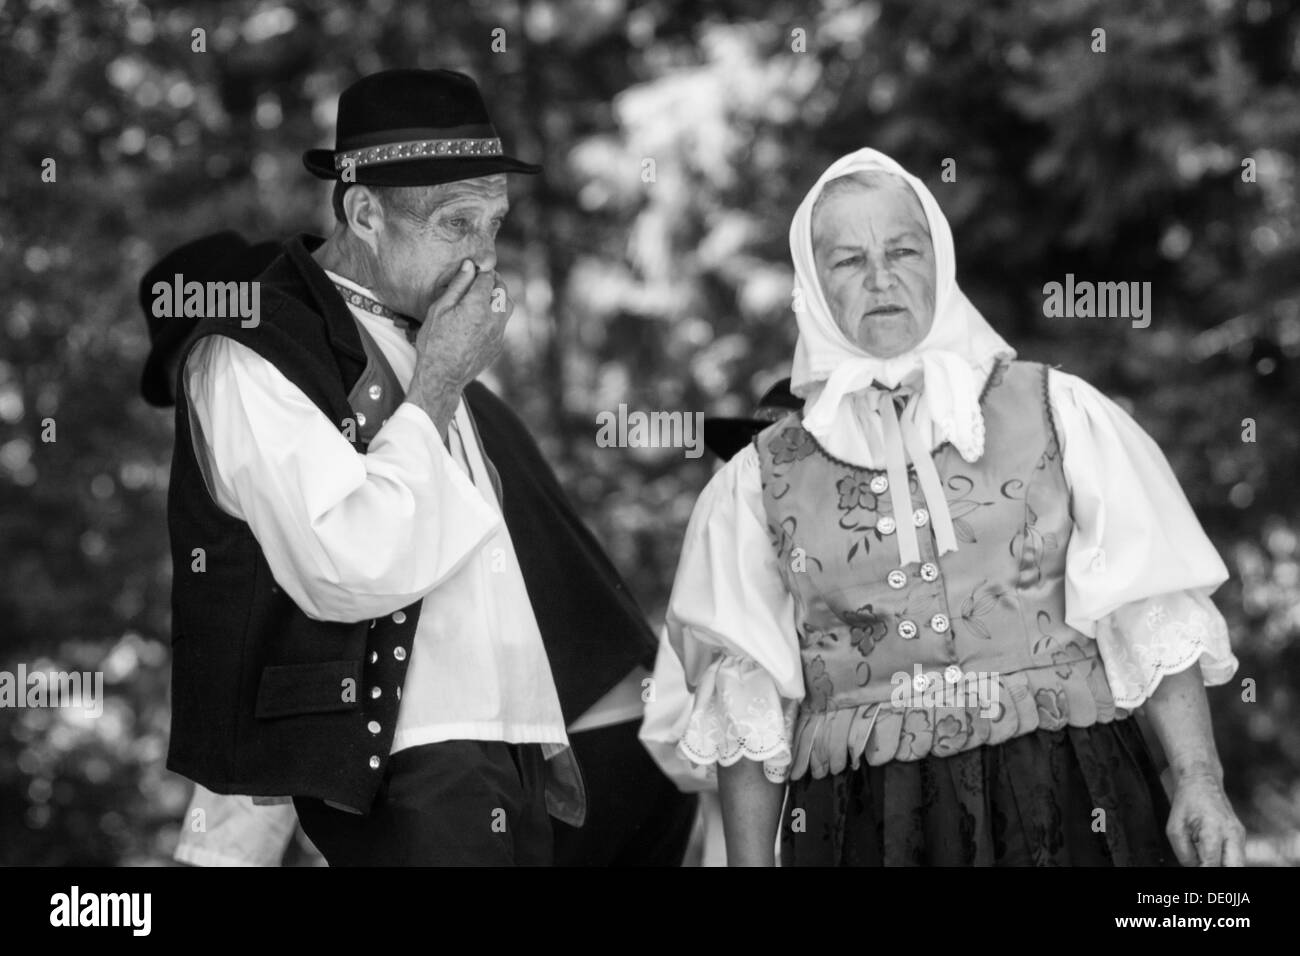 Old man and woman in costume Stock Photo